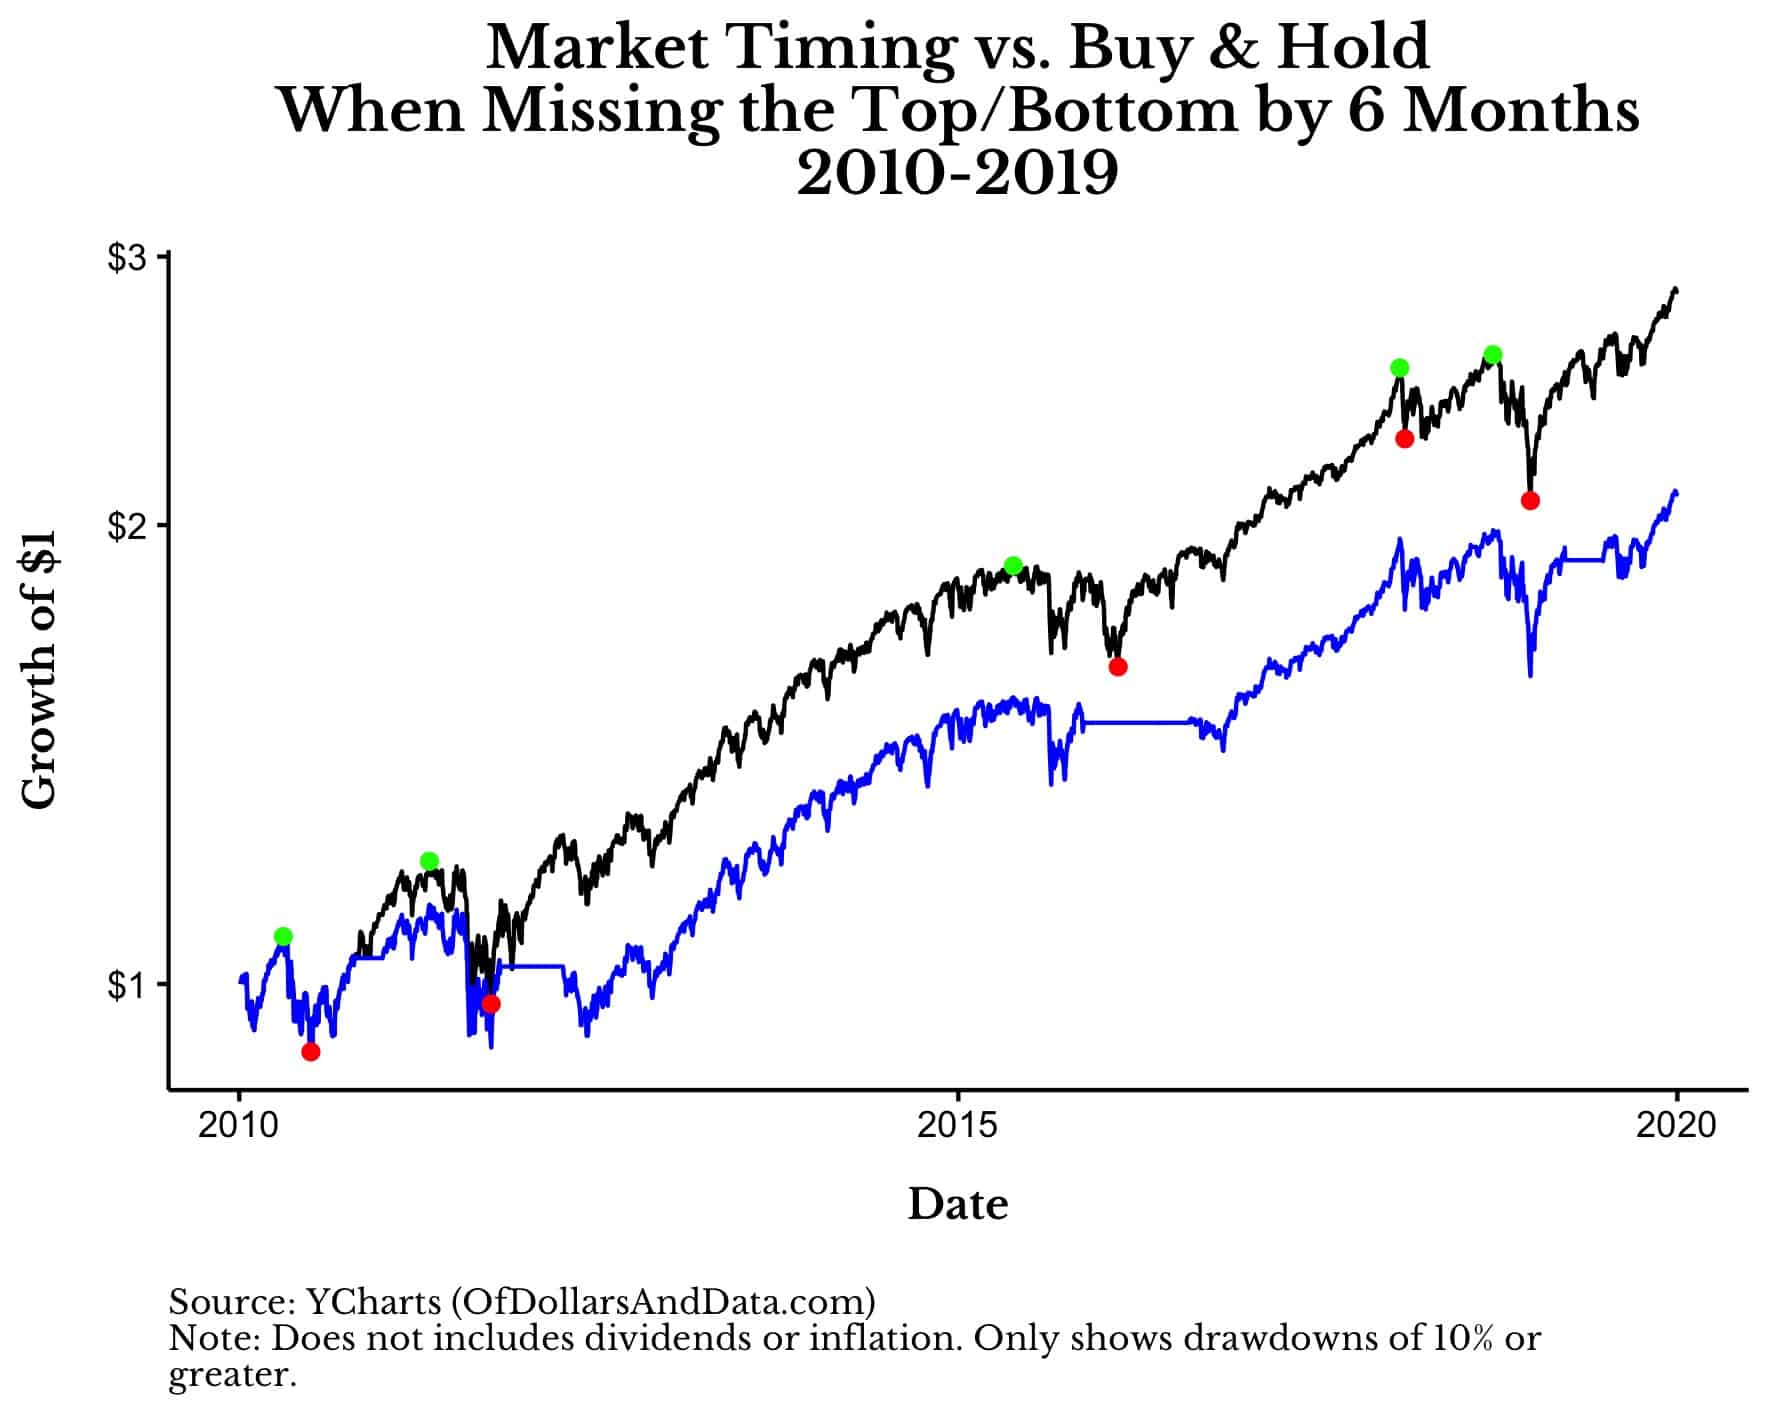 Market timing vs Buy and Hold when missing the top/bottom by 6 months, 2010-2019